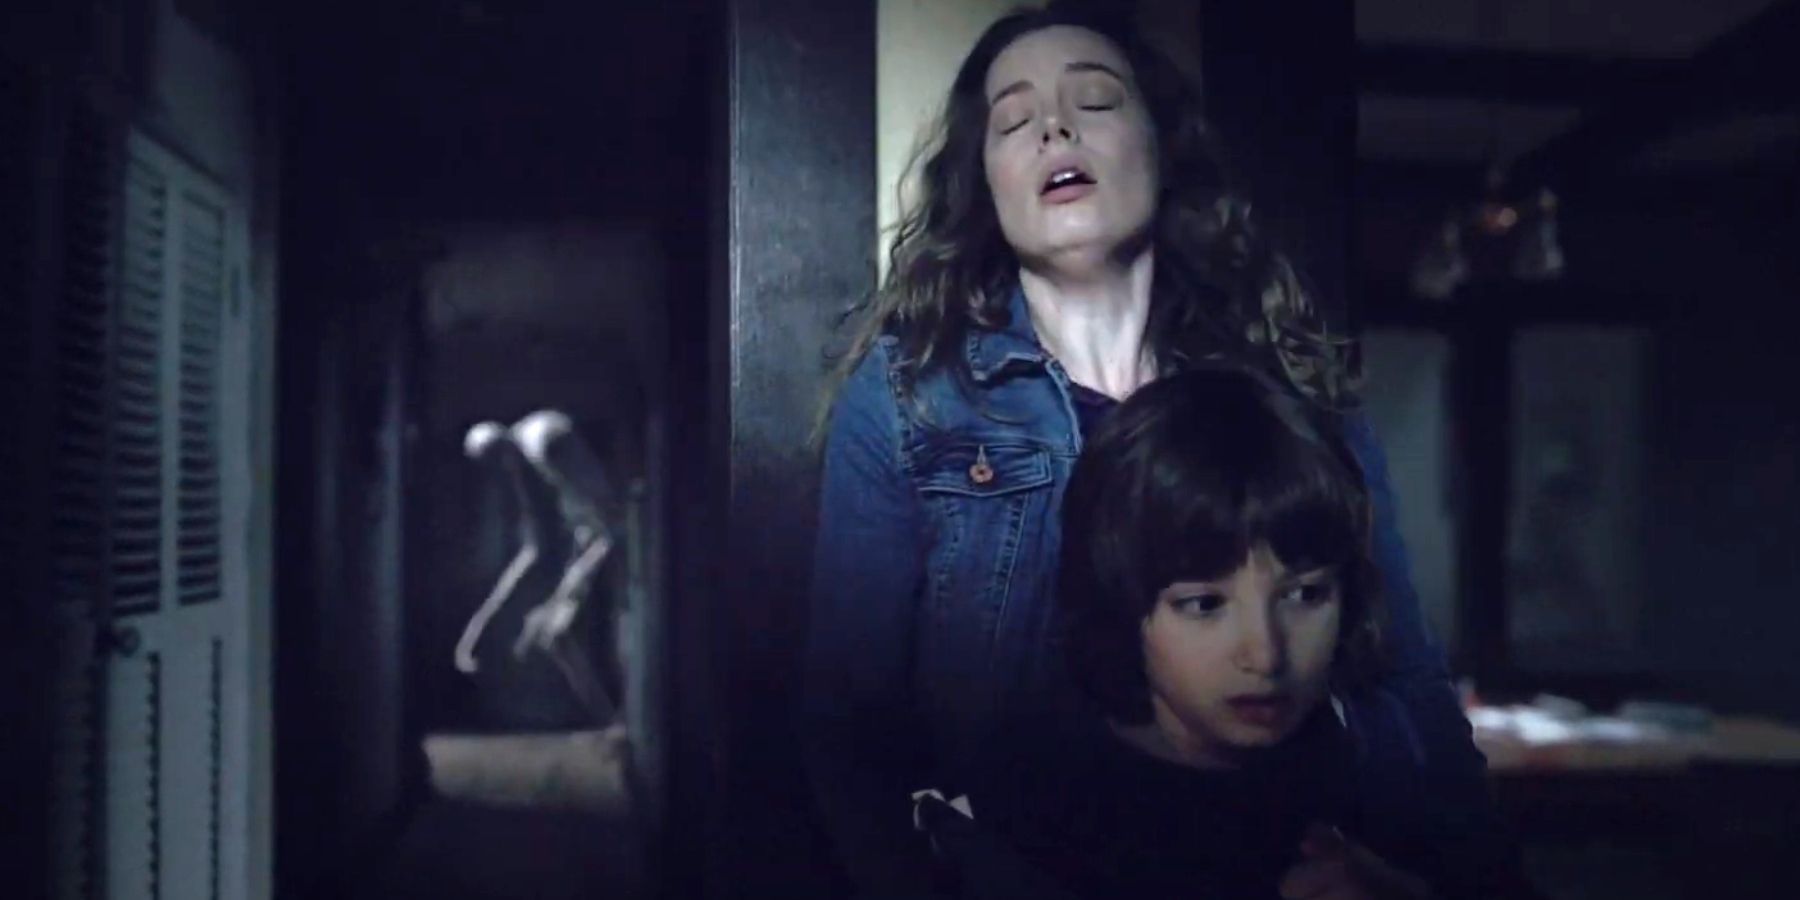 Gillian Jacobs as Sarah holding onto Azhy Robertson as Oliver in Come Play